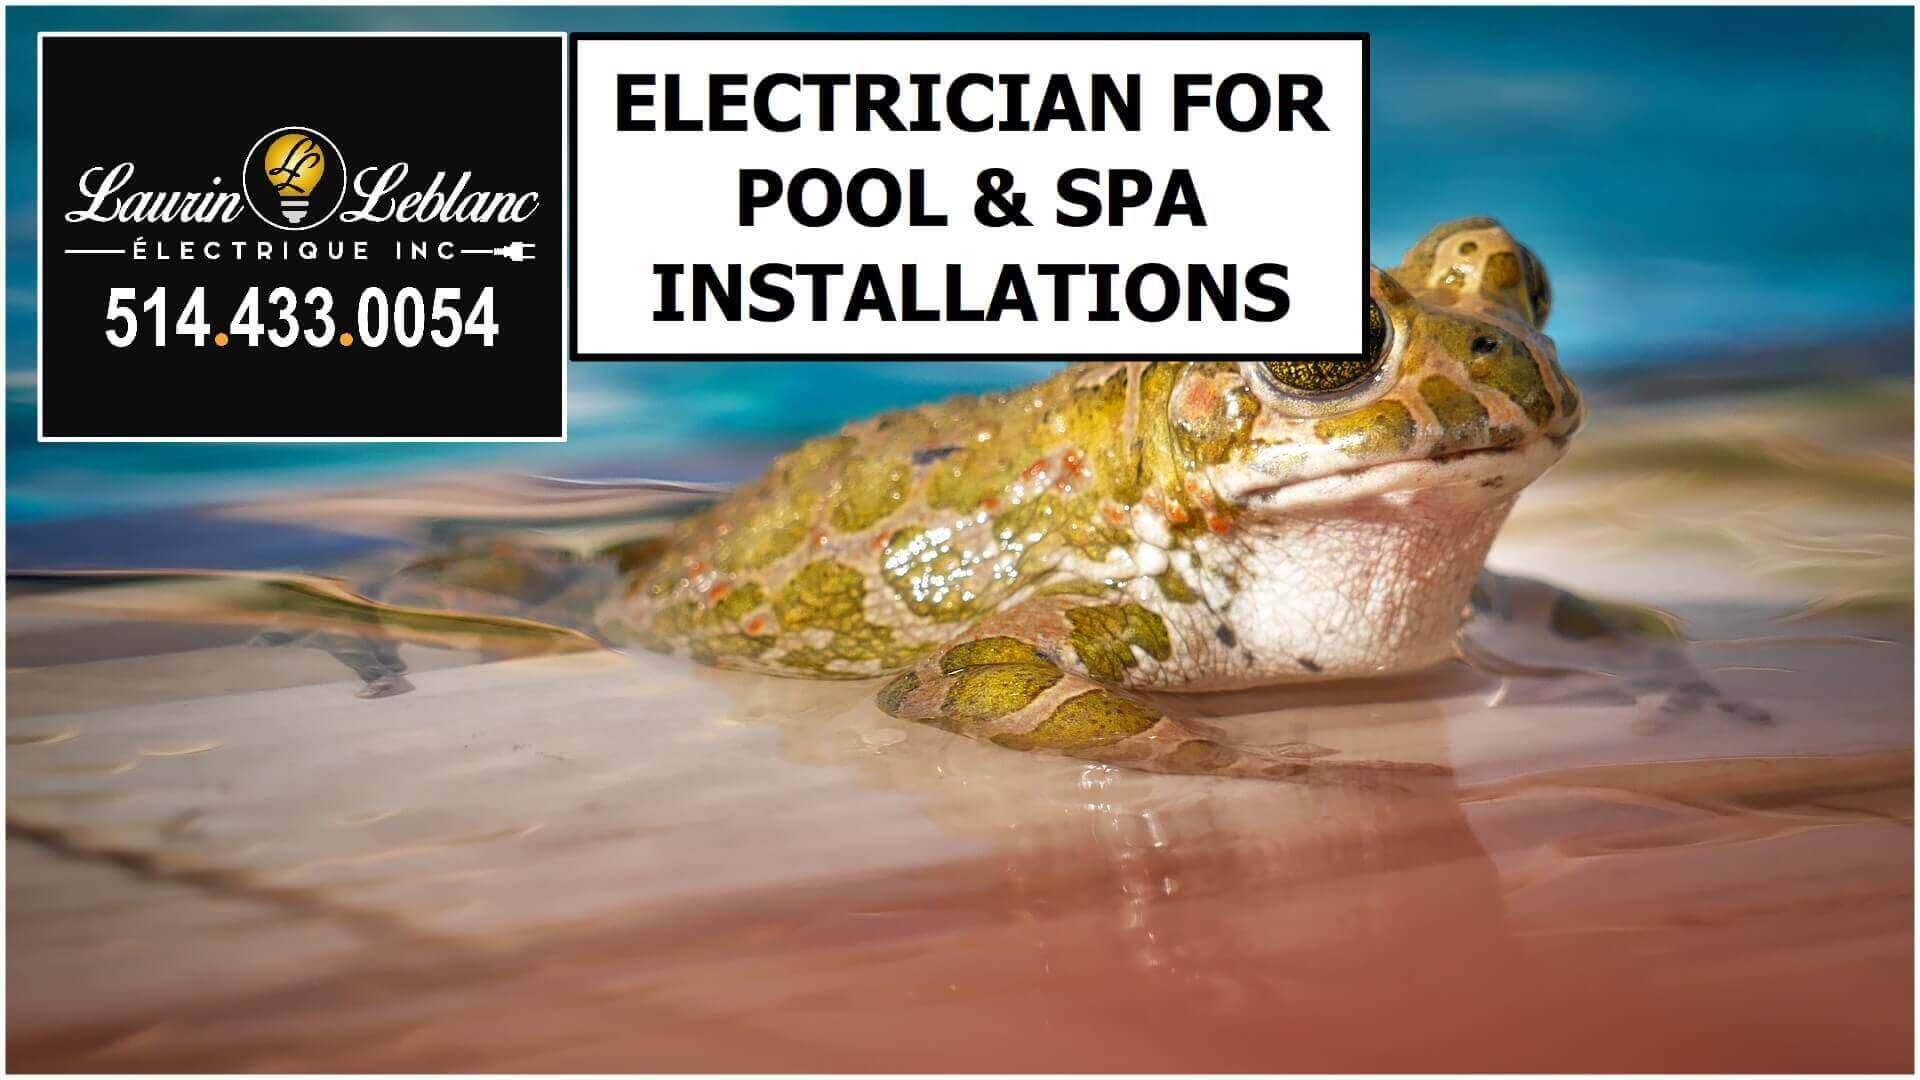 Pool Electrician in Rigaud